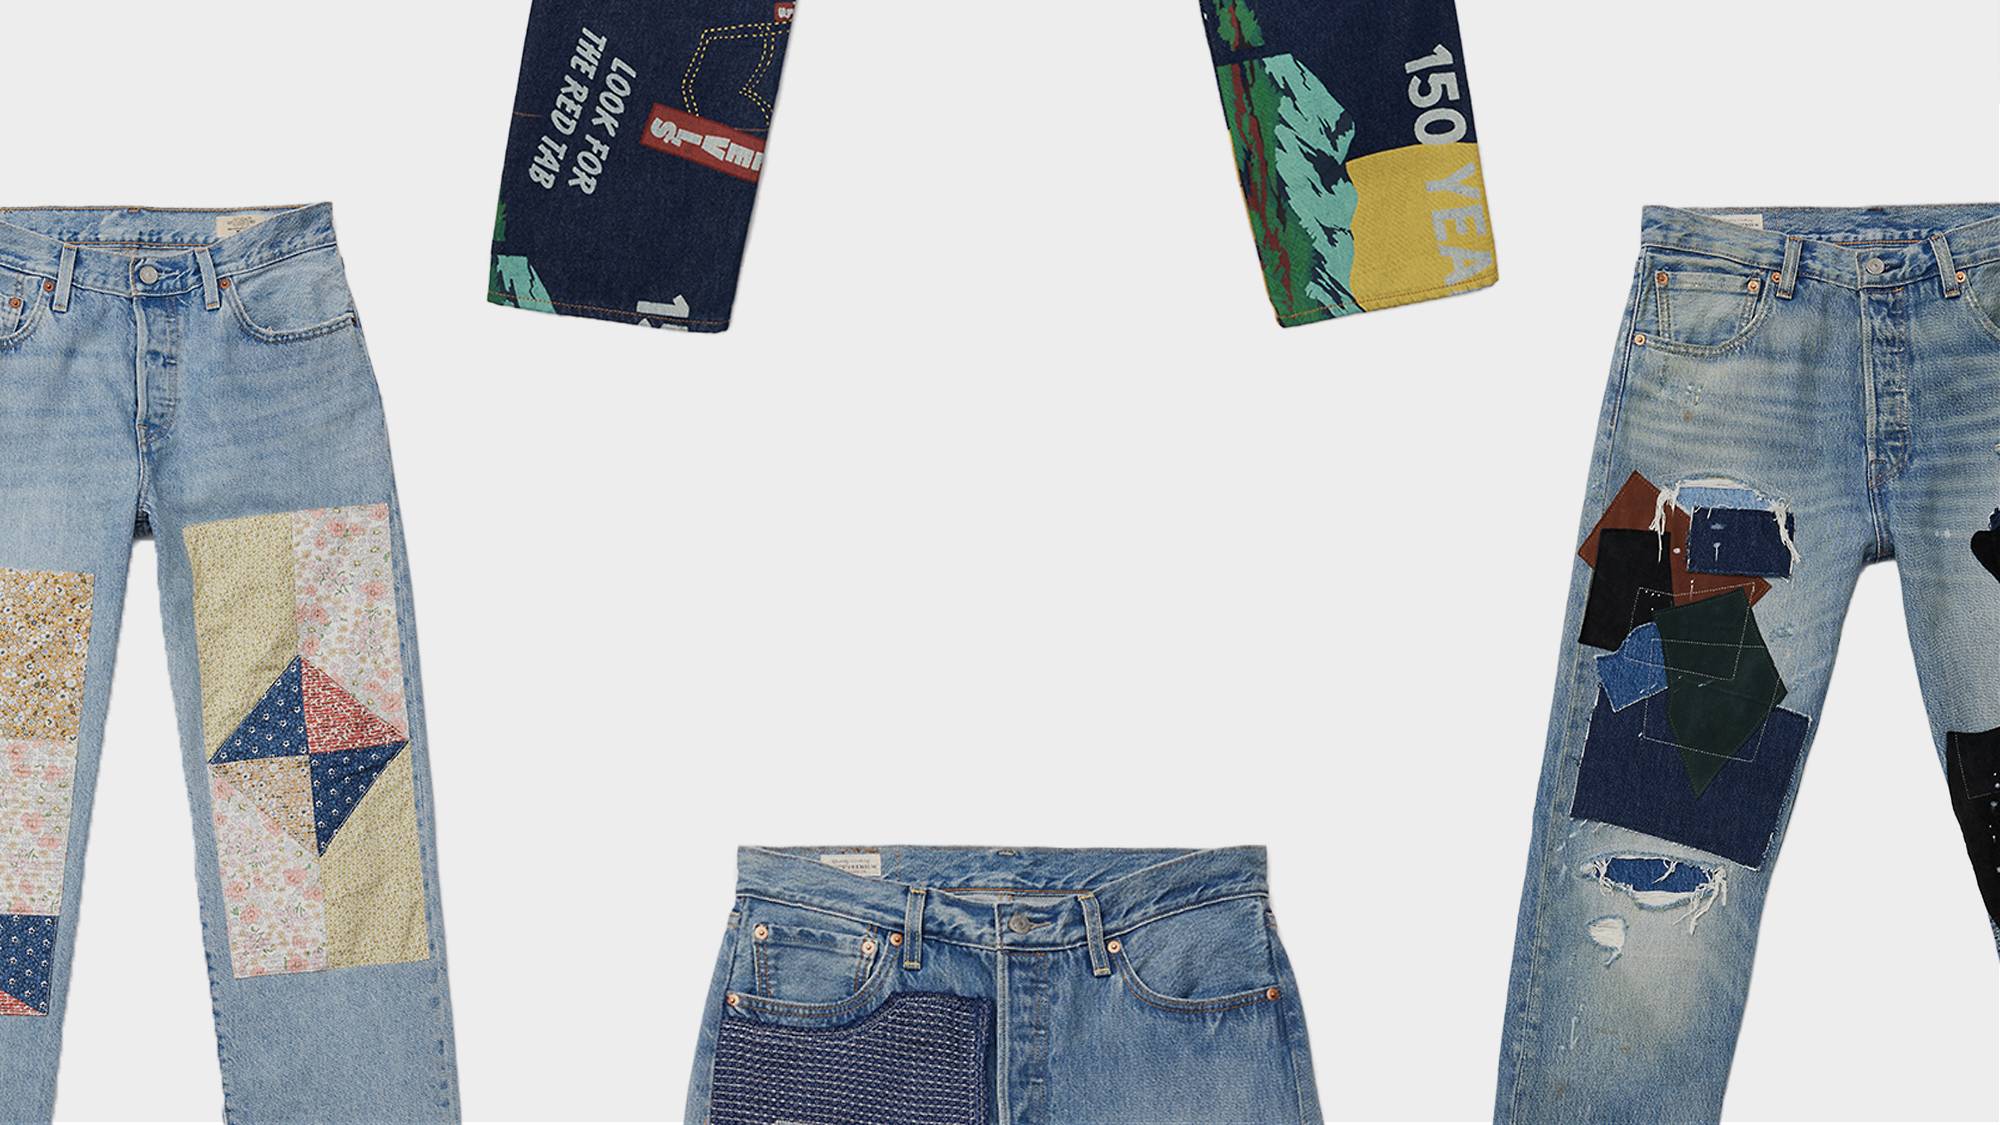 The unlikely history of Levi's jeans - or, how clothes from 150